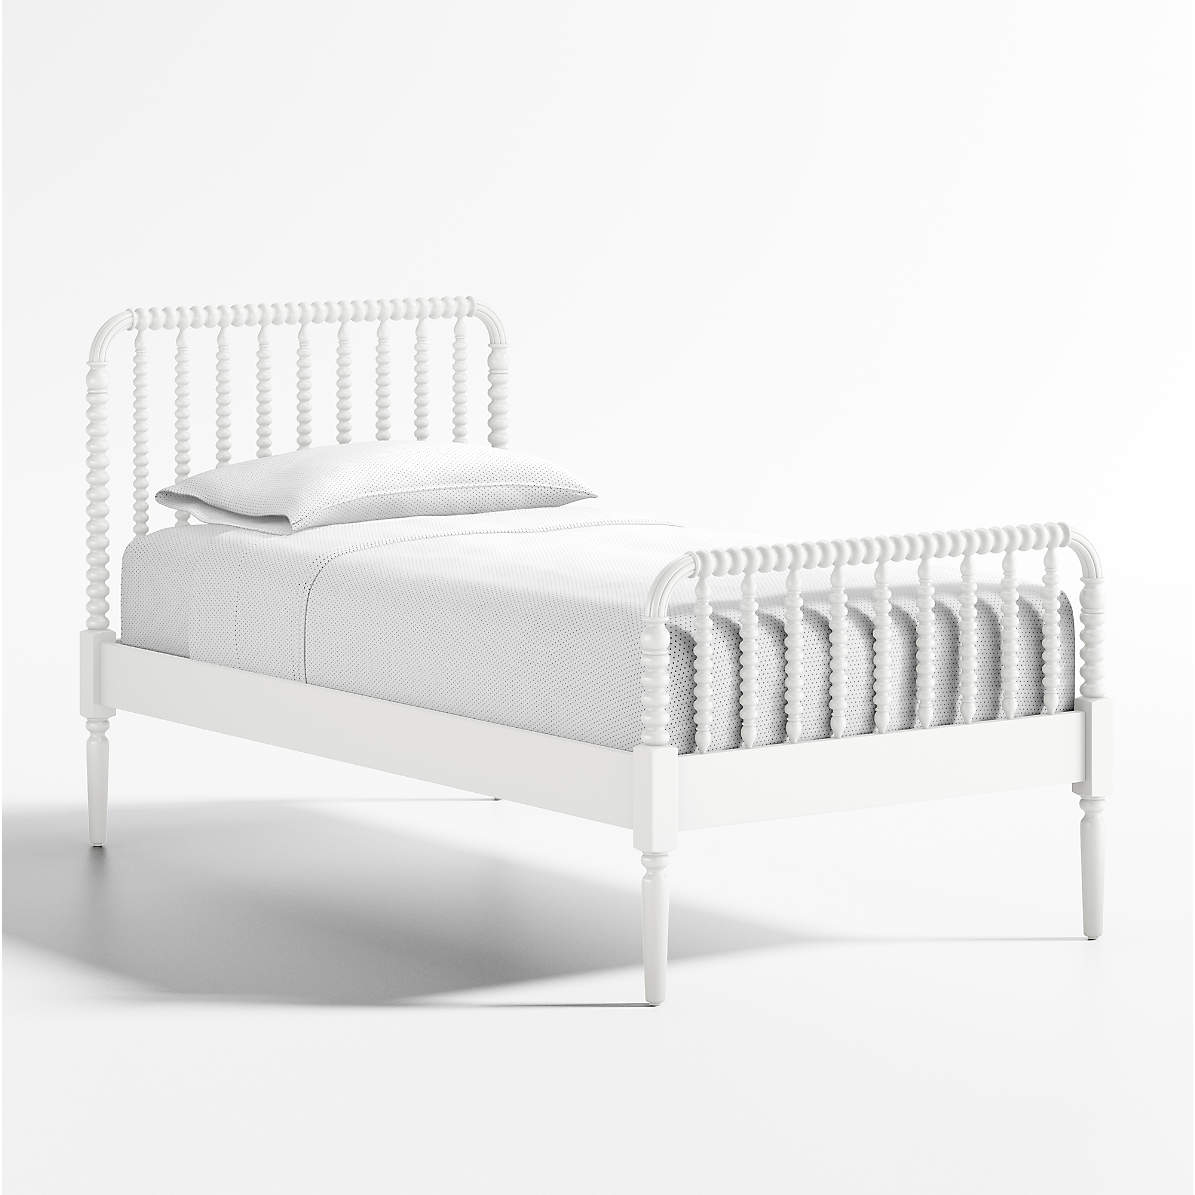 Jenny Lind Kids Bed White Crate, White Jenny Lind Twin Bed